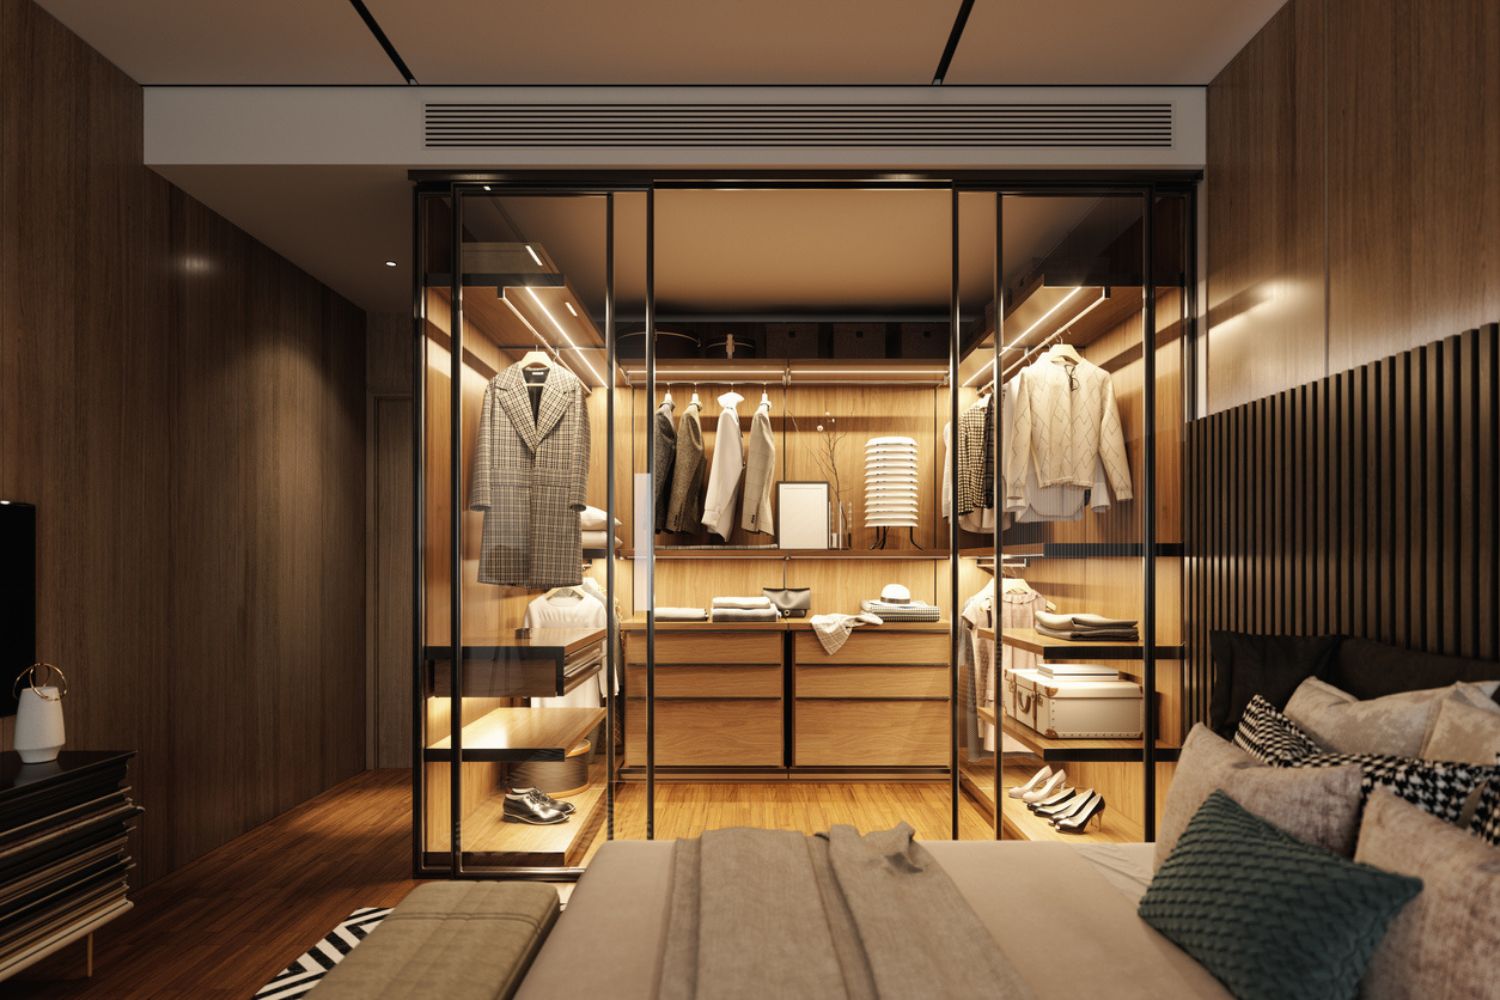 How Much Do Closets by Design Cost: A cost-effective, streamlined design from Closets by Design